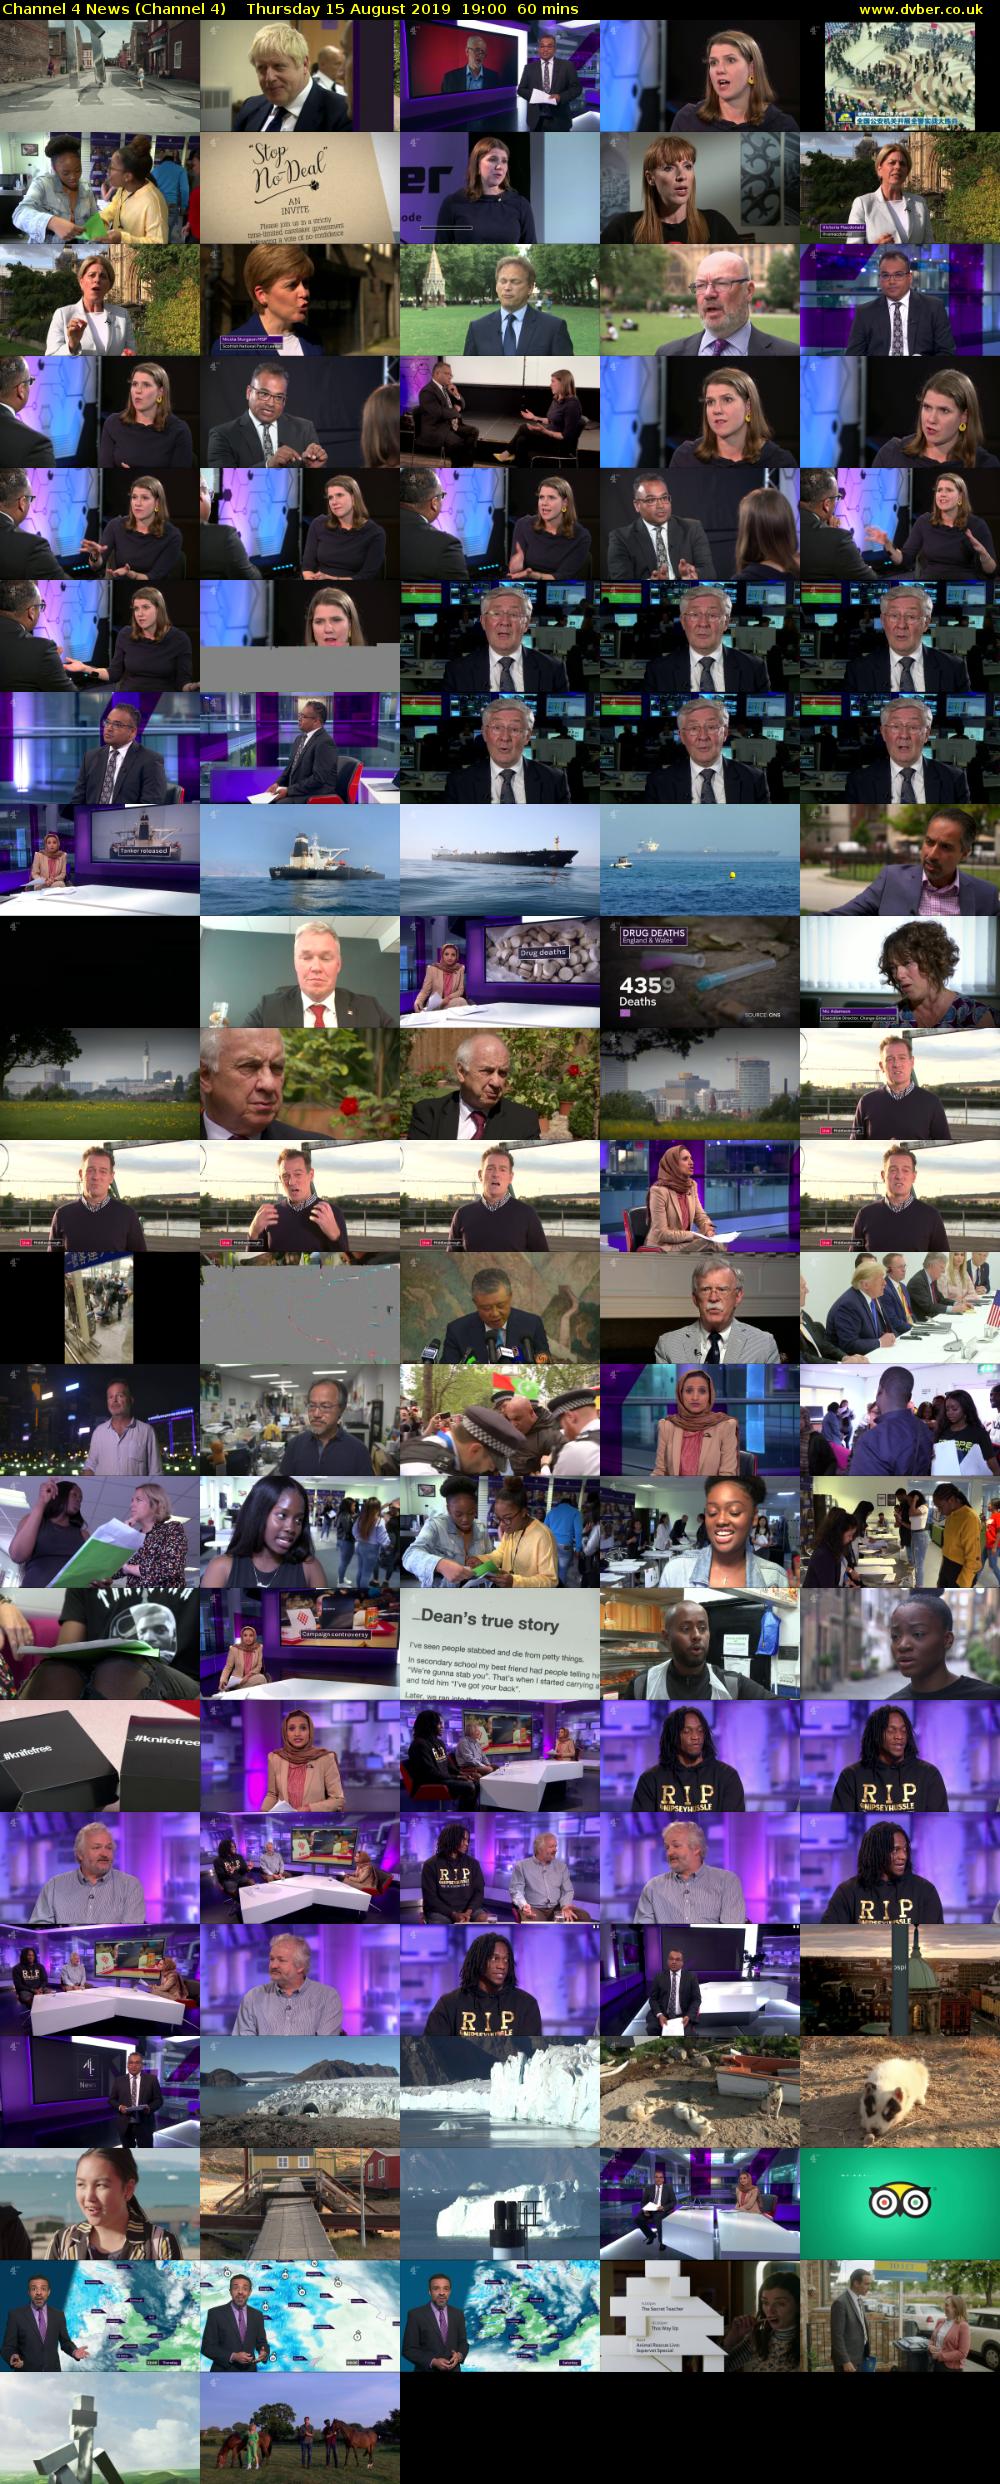 Channel 4 News (Channel 4) Thursday 15 August 2019 19:00 - 20:00